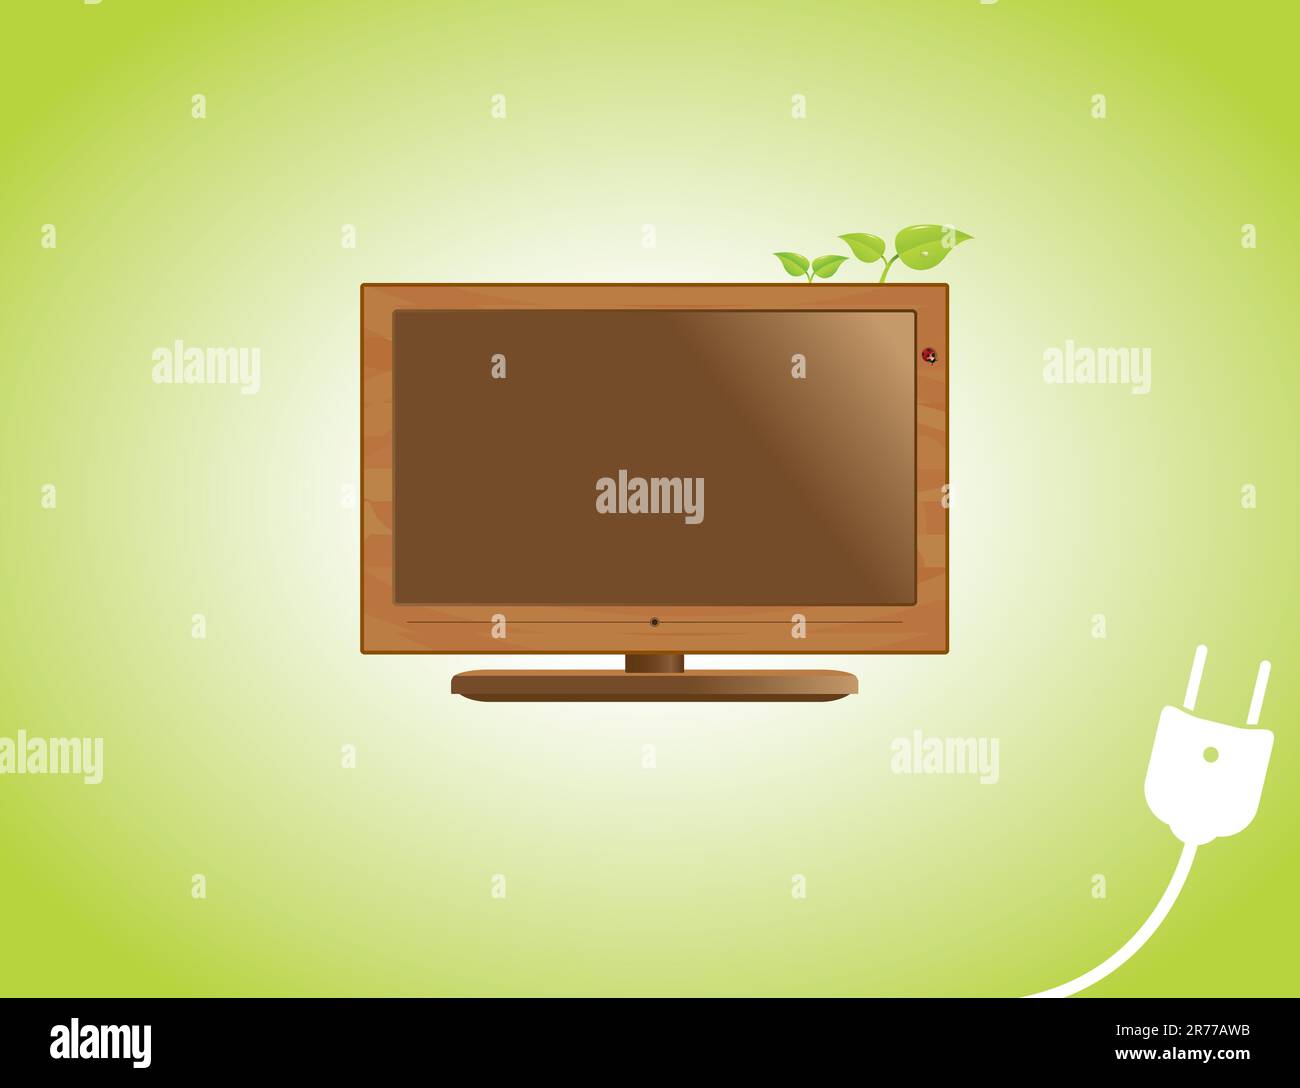 A LCD television with a wooden frame, leaves and a ladybug, on a green background. Stock Vector